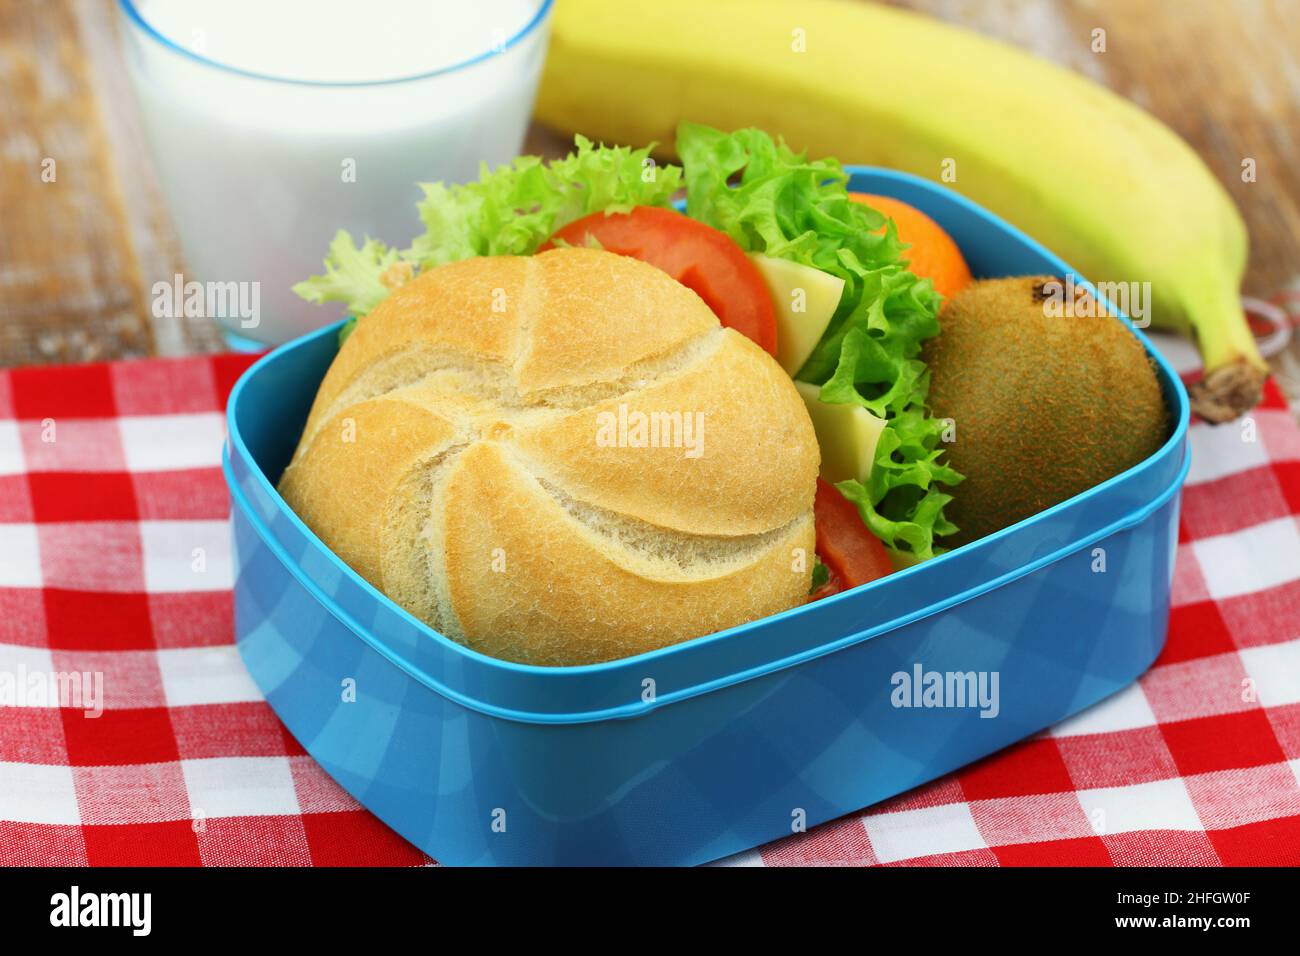 Healthy school lunchbox containing roll with cheese, lettuce and tomato, banana, kiwi fruit and glass of milk Stock Photo